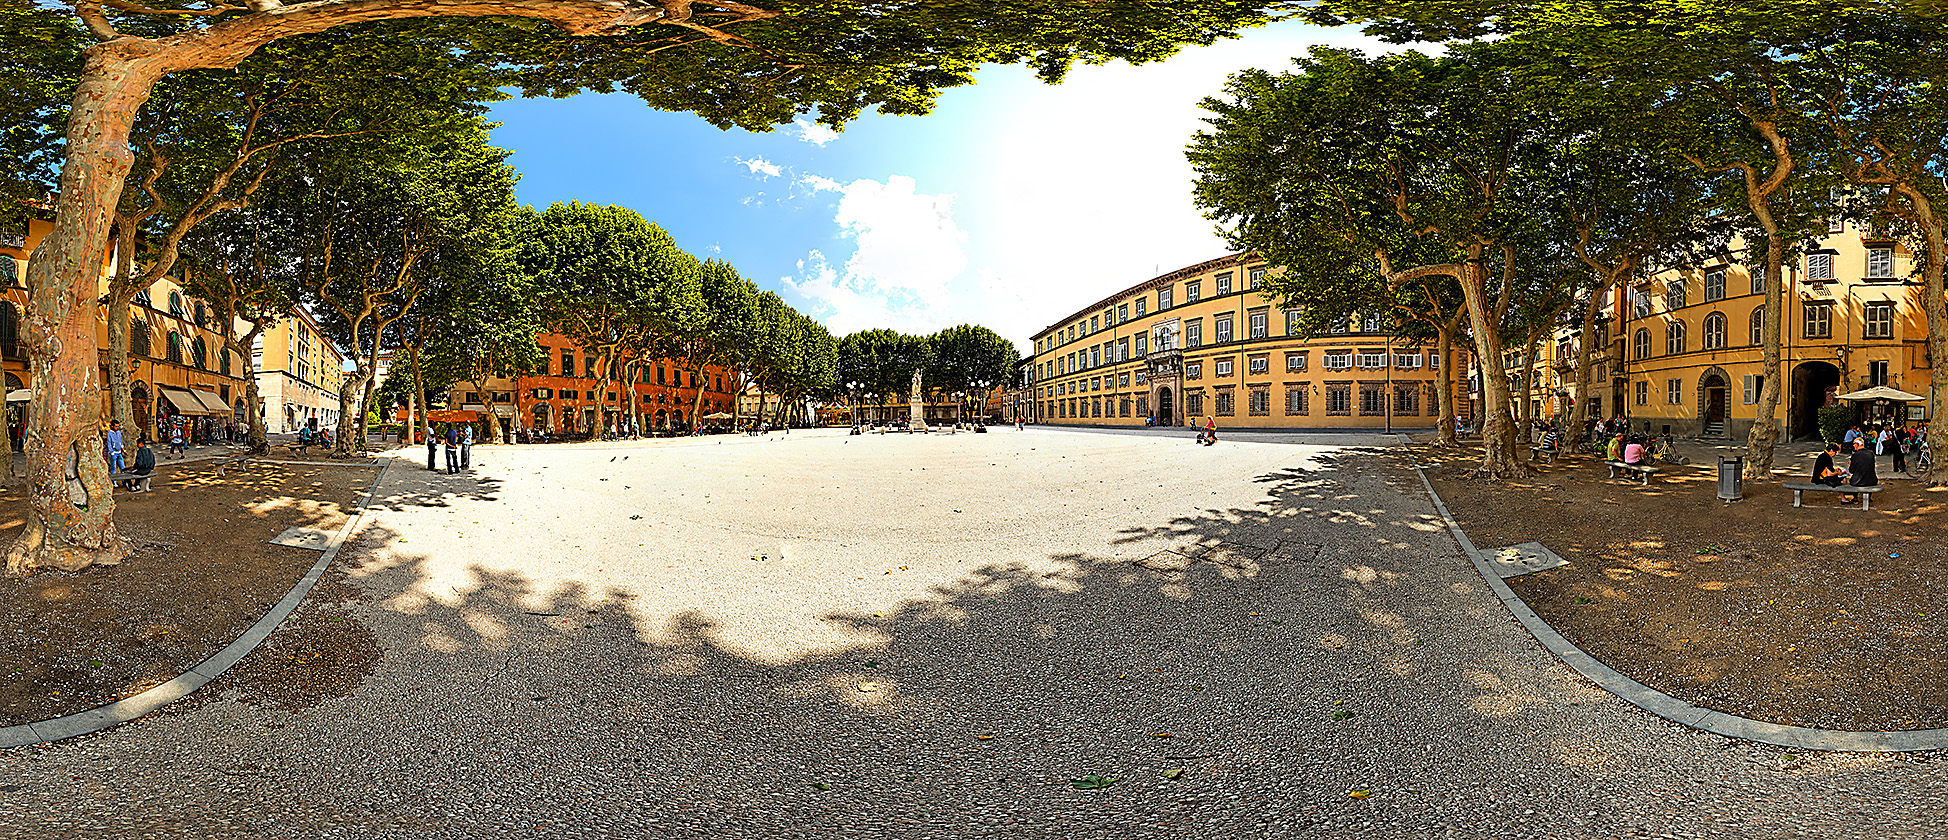 2009_06_PANOS IMG_0613 ITALY_Lucca Pano Piazza Napoleone_PanoramicC